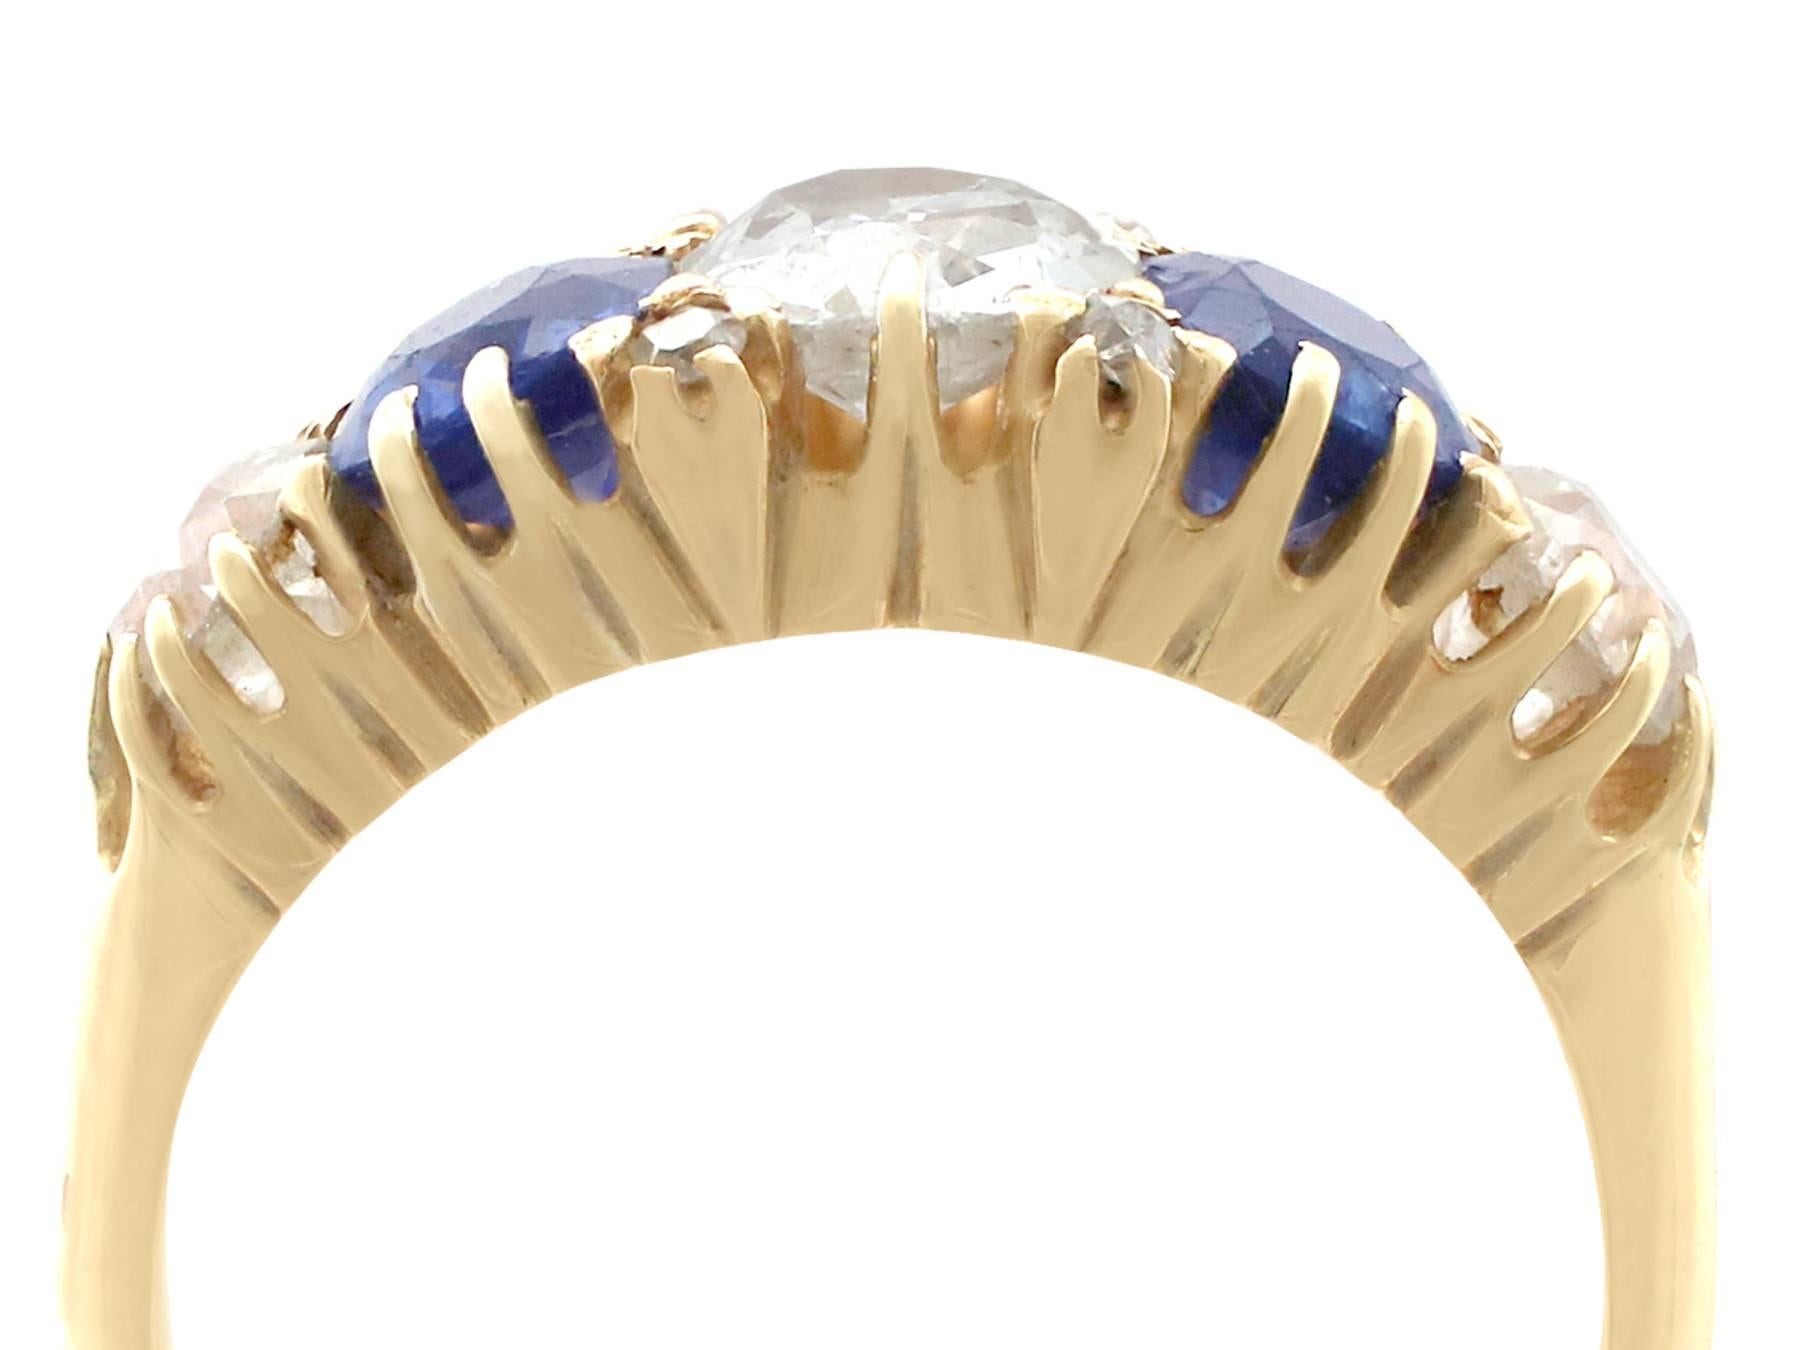 A stunning, fine and impressive antique 1.62 carat natural blue sapphire and 1.45 carat diamond, 18 karat yellow gold, five stone ring; part of our antique jewellery and estate jewelry collections.

This stunning, fine and impressive antique